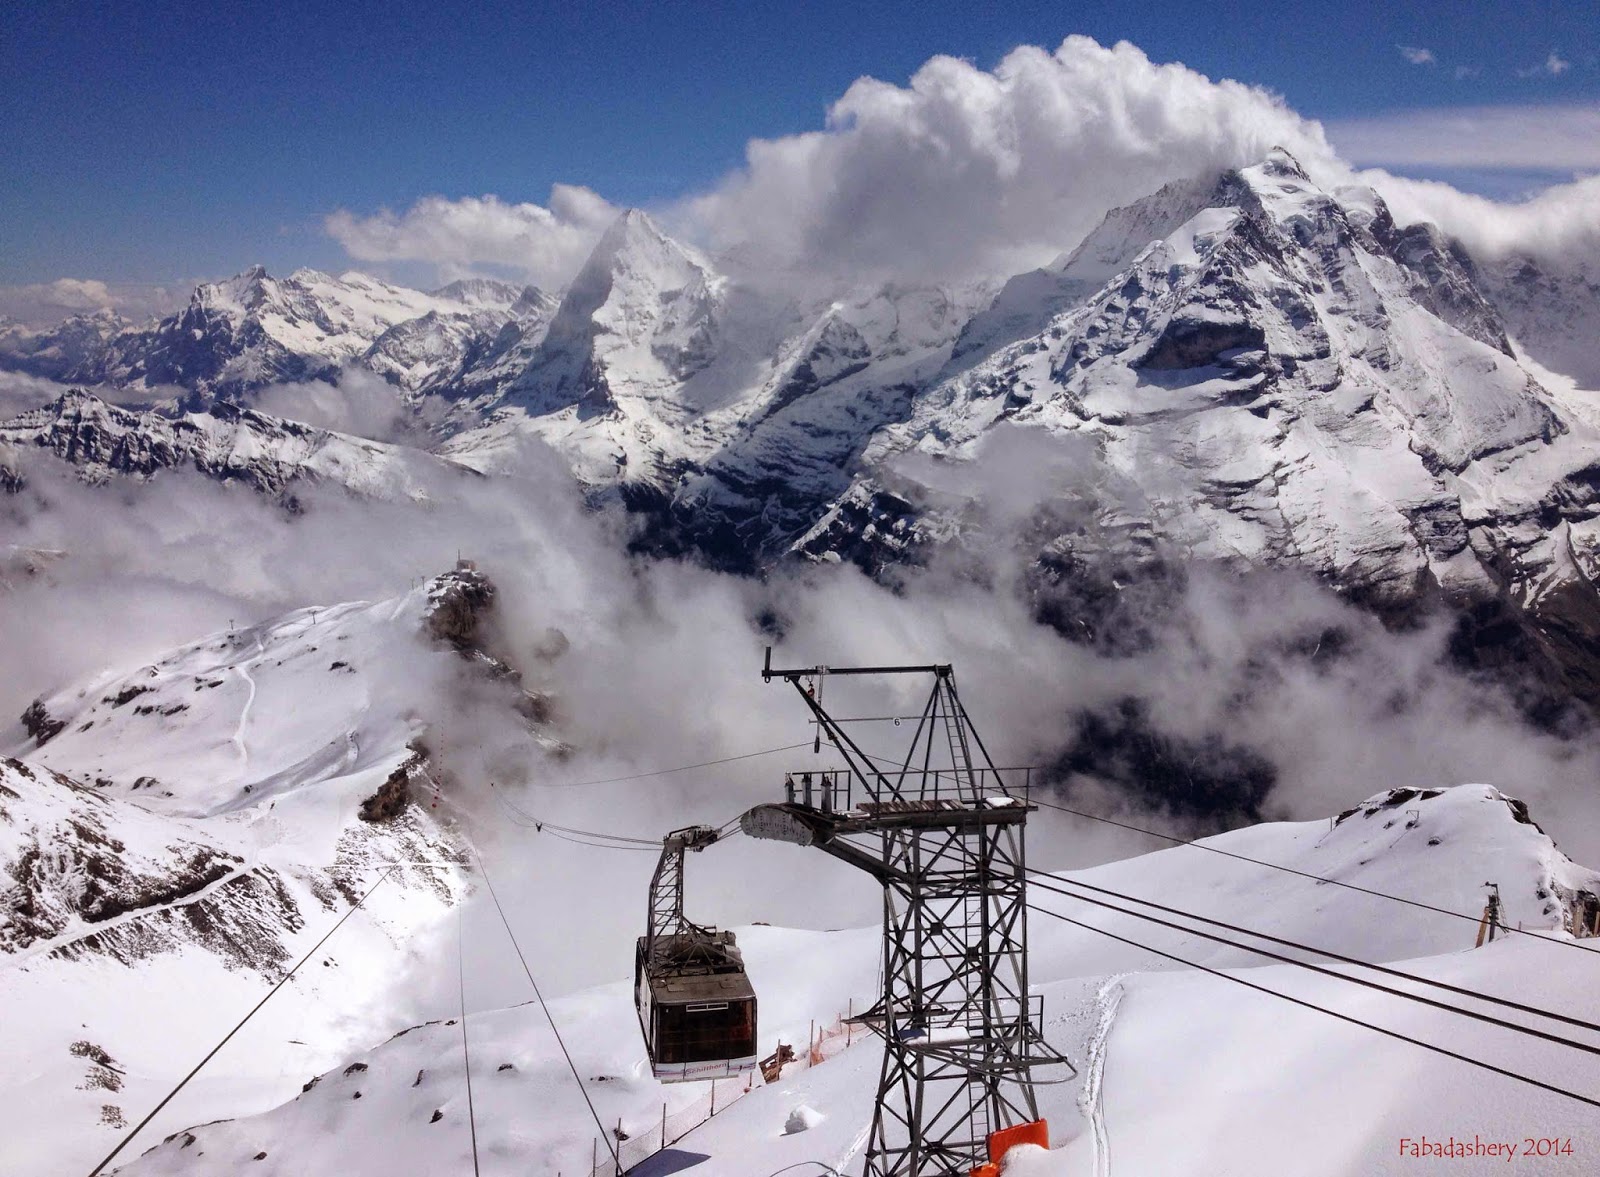 View of the cable car from Piz Gloria, Shilthorn, Switzerlabnd